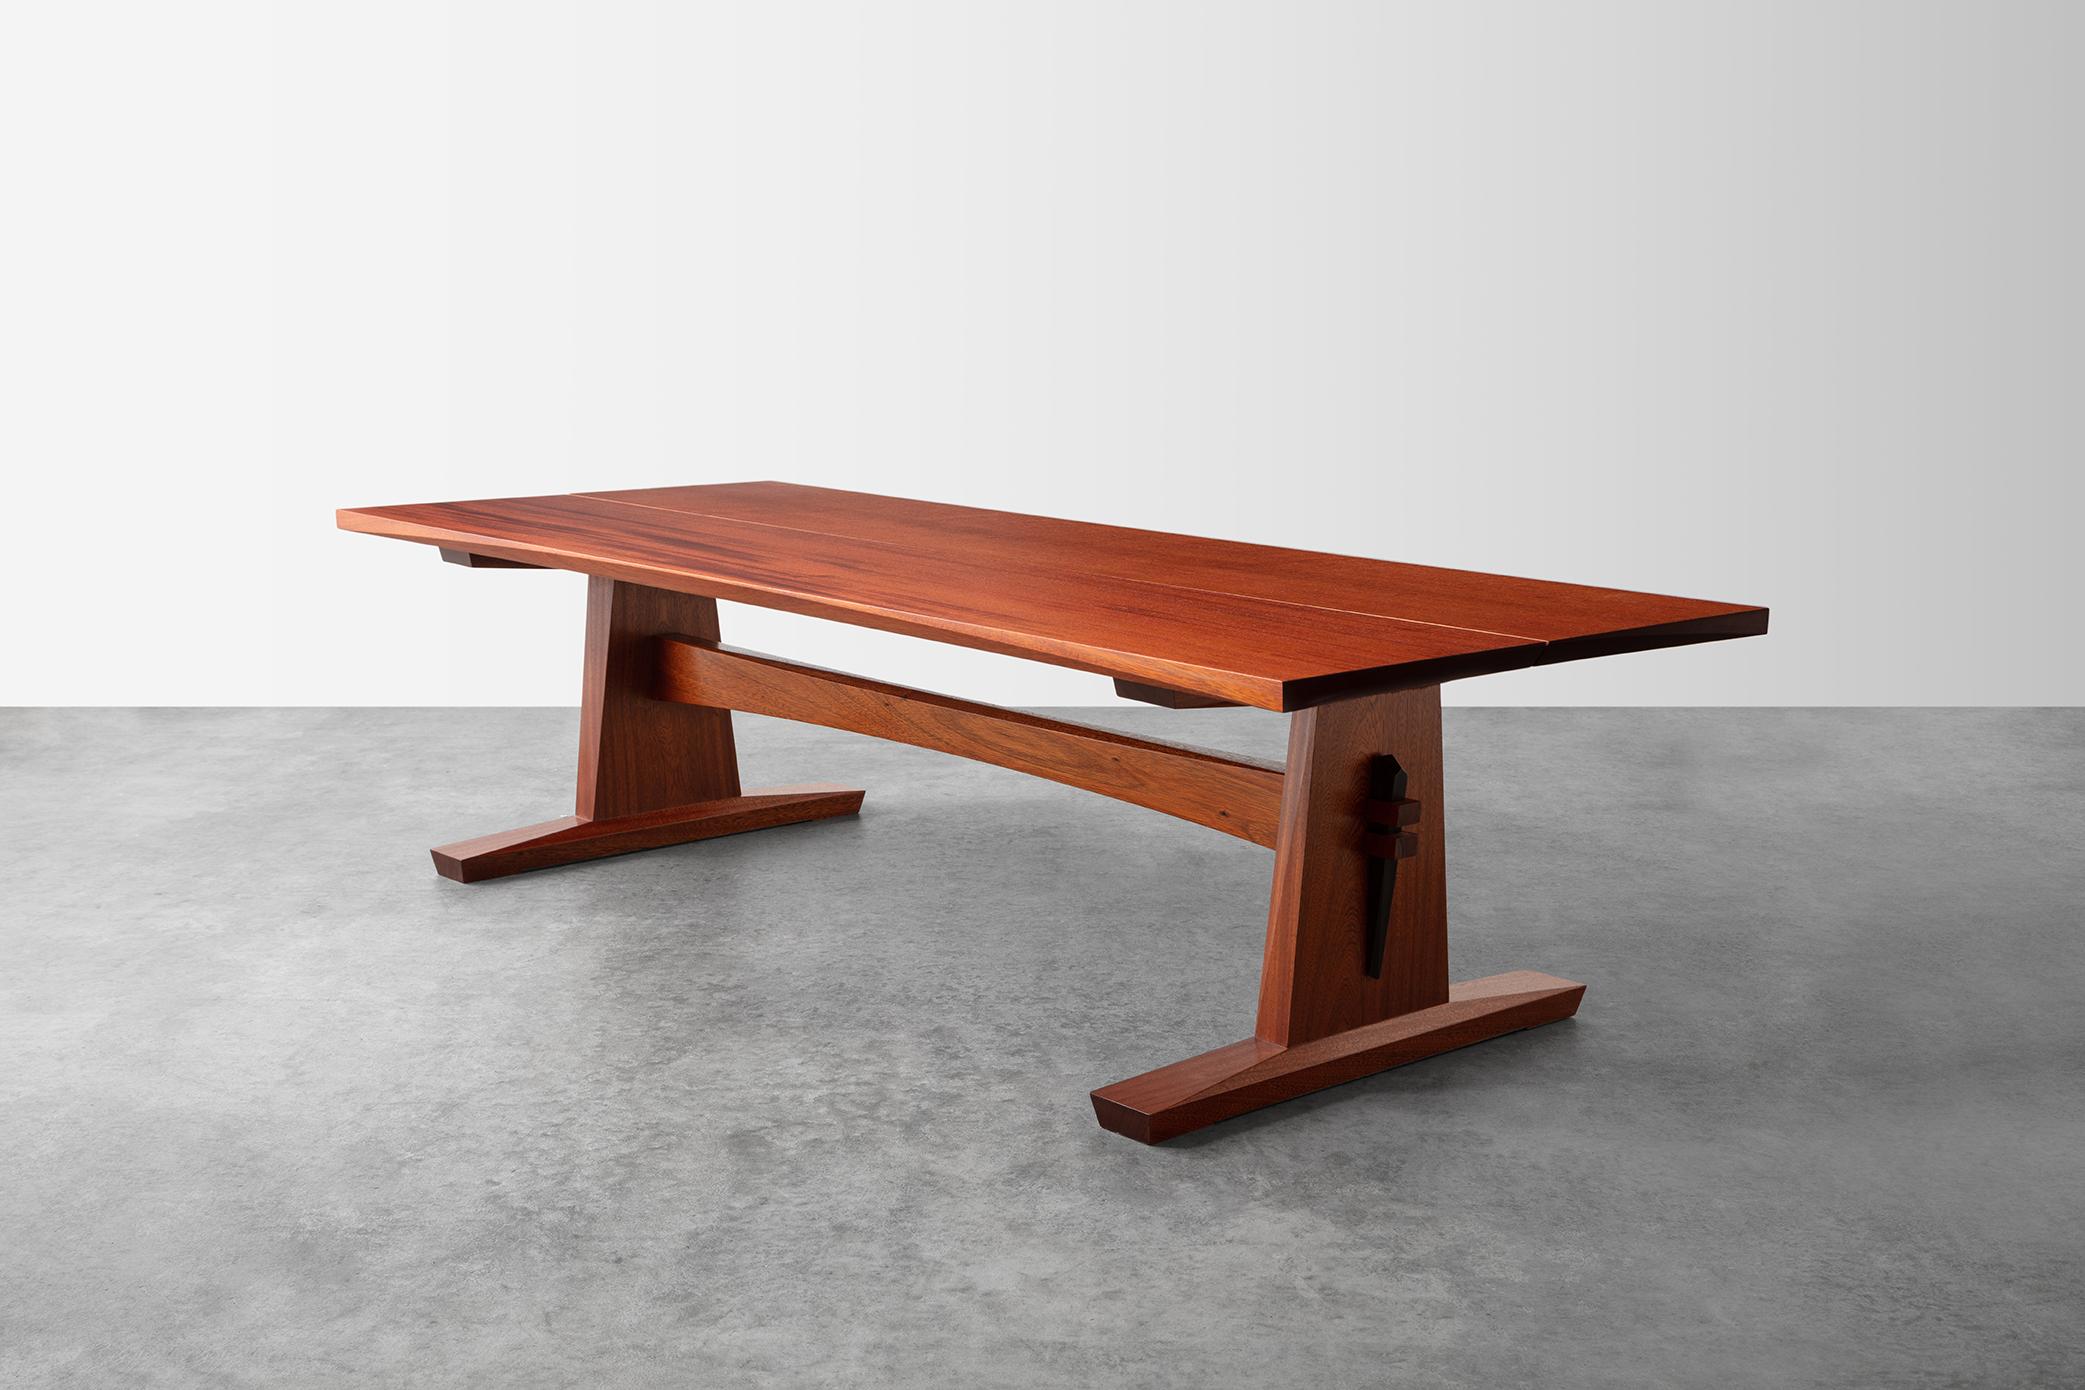 American Craftsman Contemporary Cocktail Table, Hand-cut Joinery, by Richard Haining, Available Now For Sale